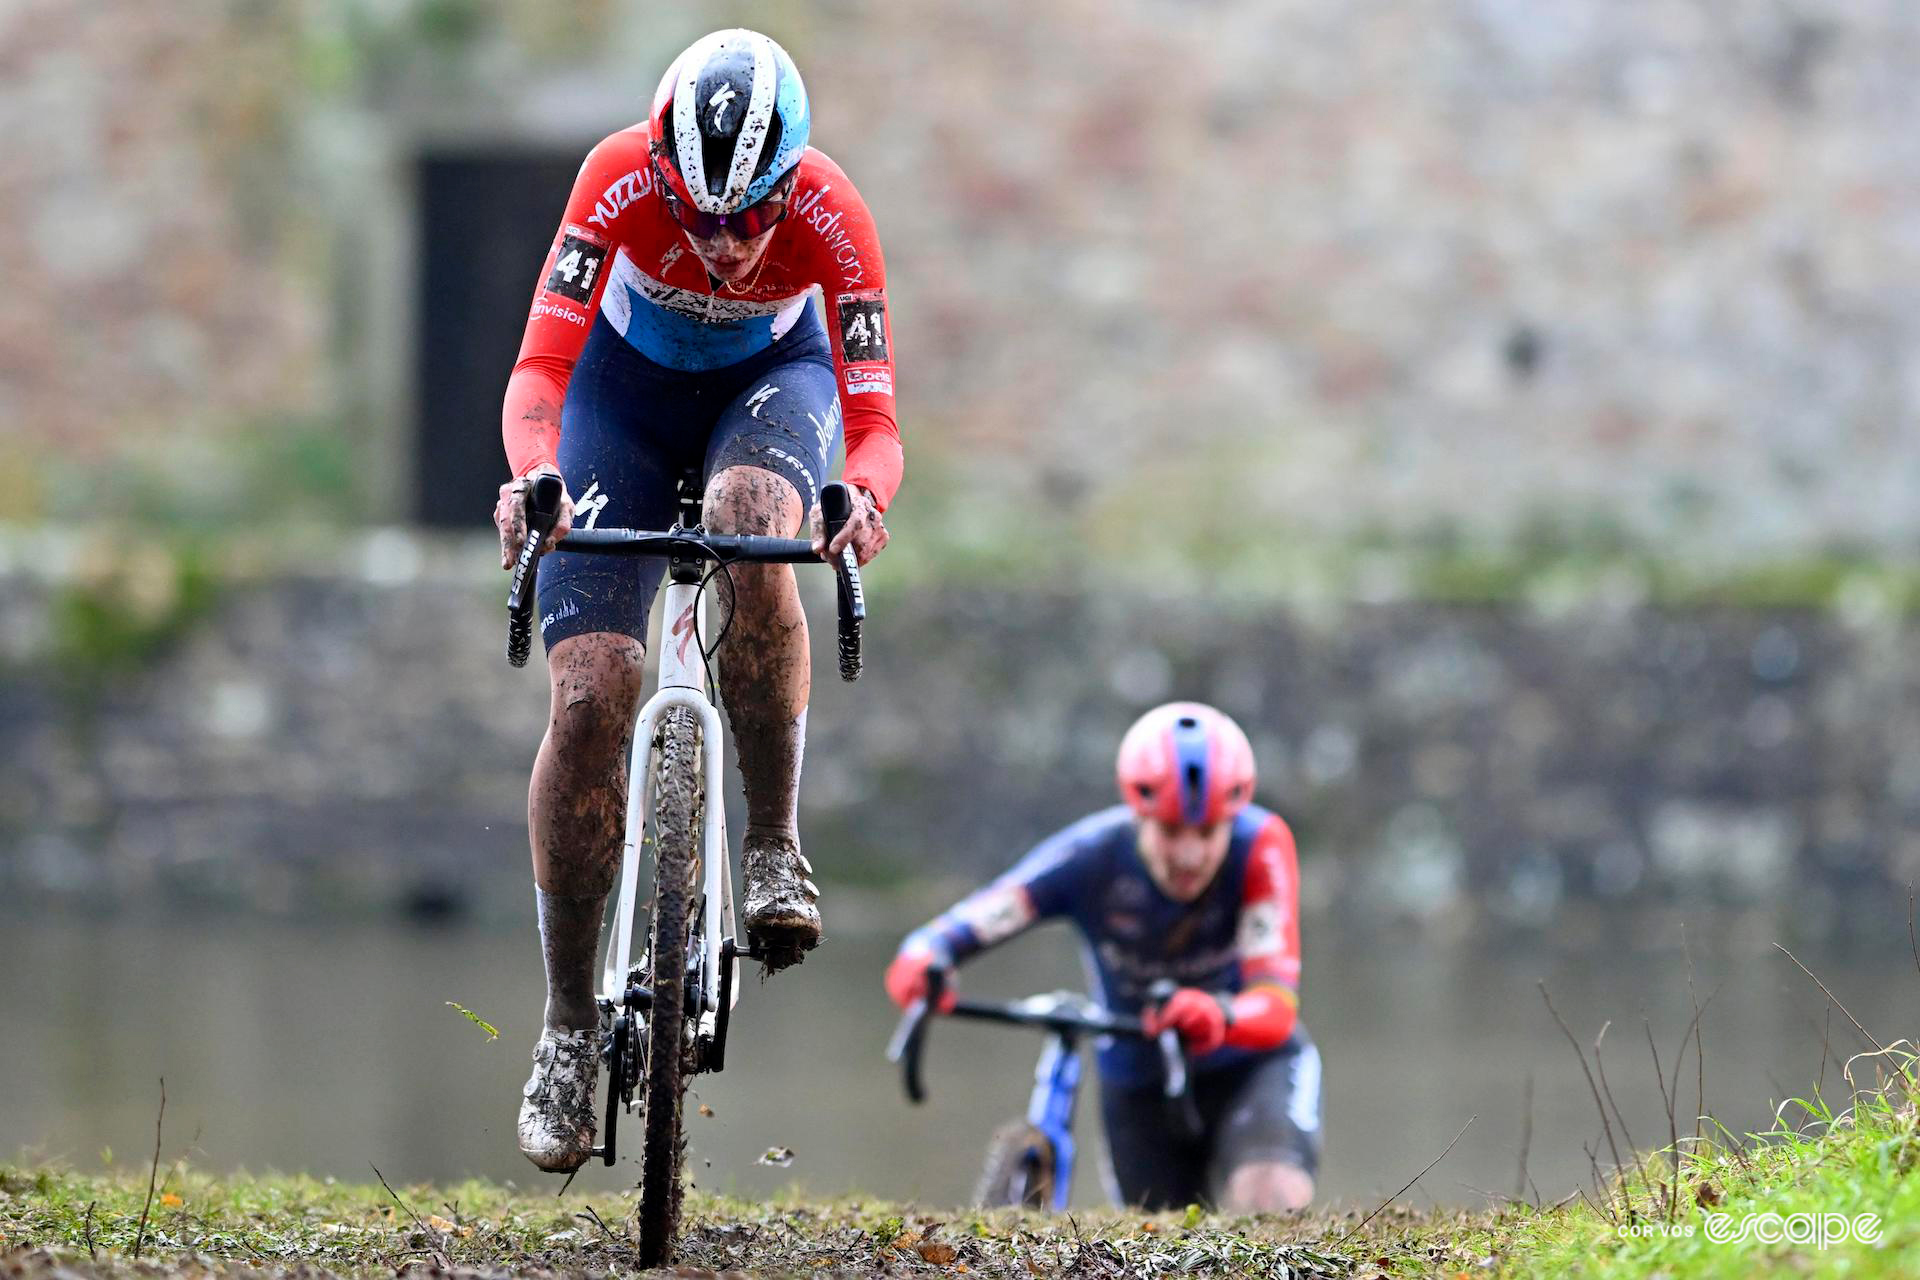 Marie Schreiber rides hard early in Cyclocross World Cup Flamanville as Lucinda Brand chases in the background.